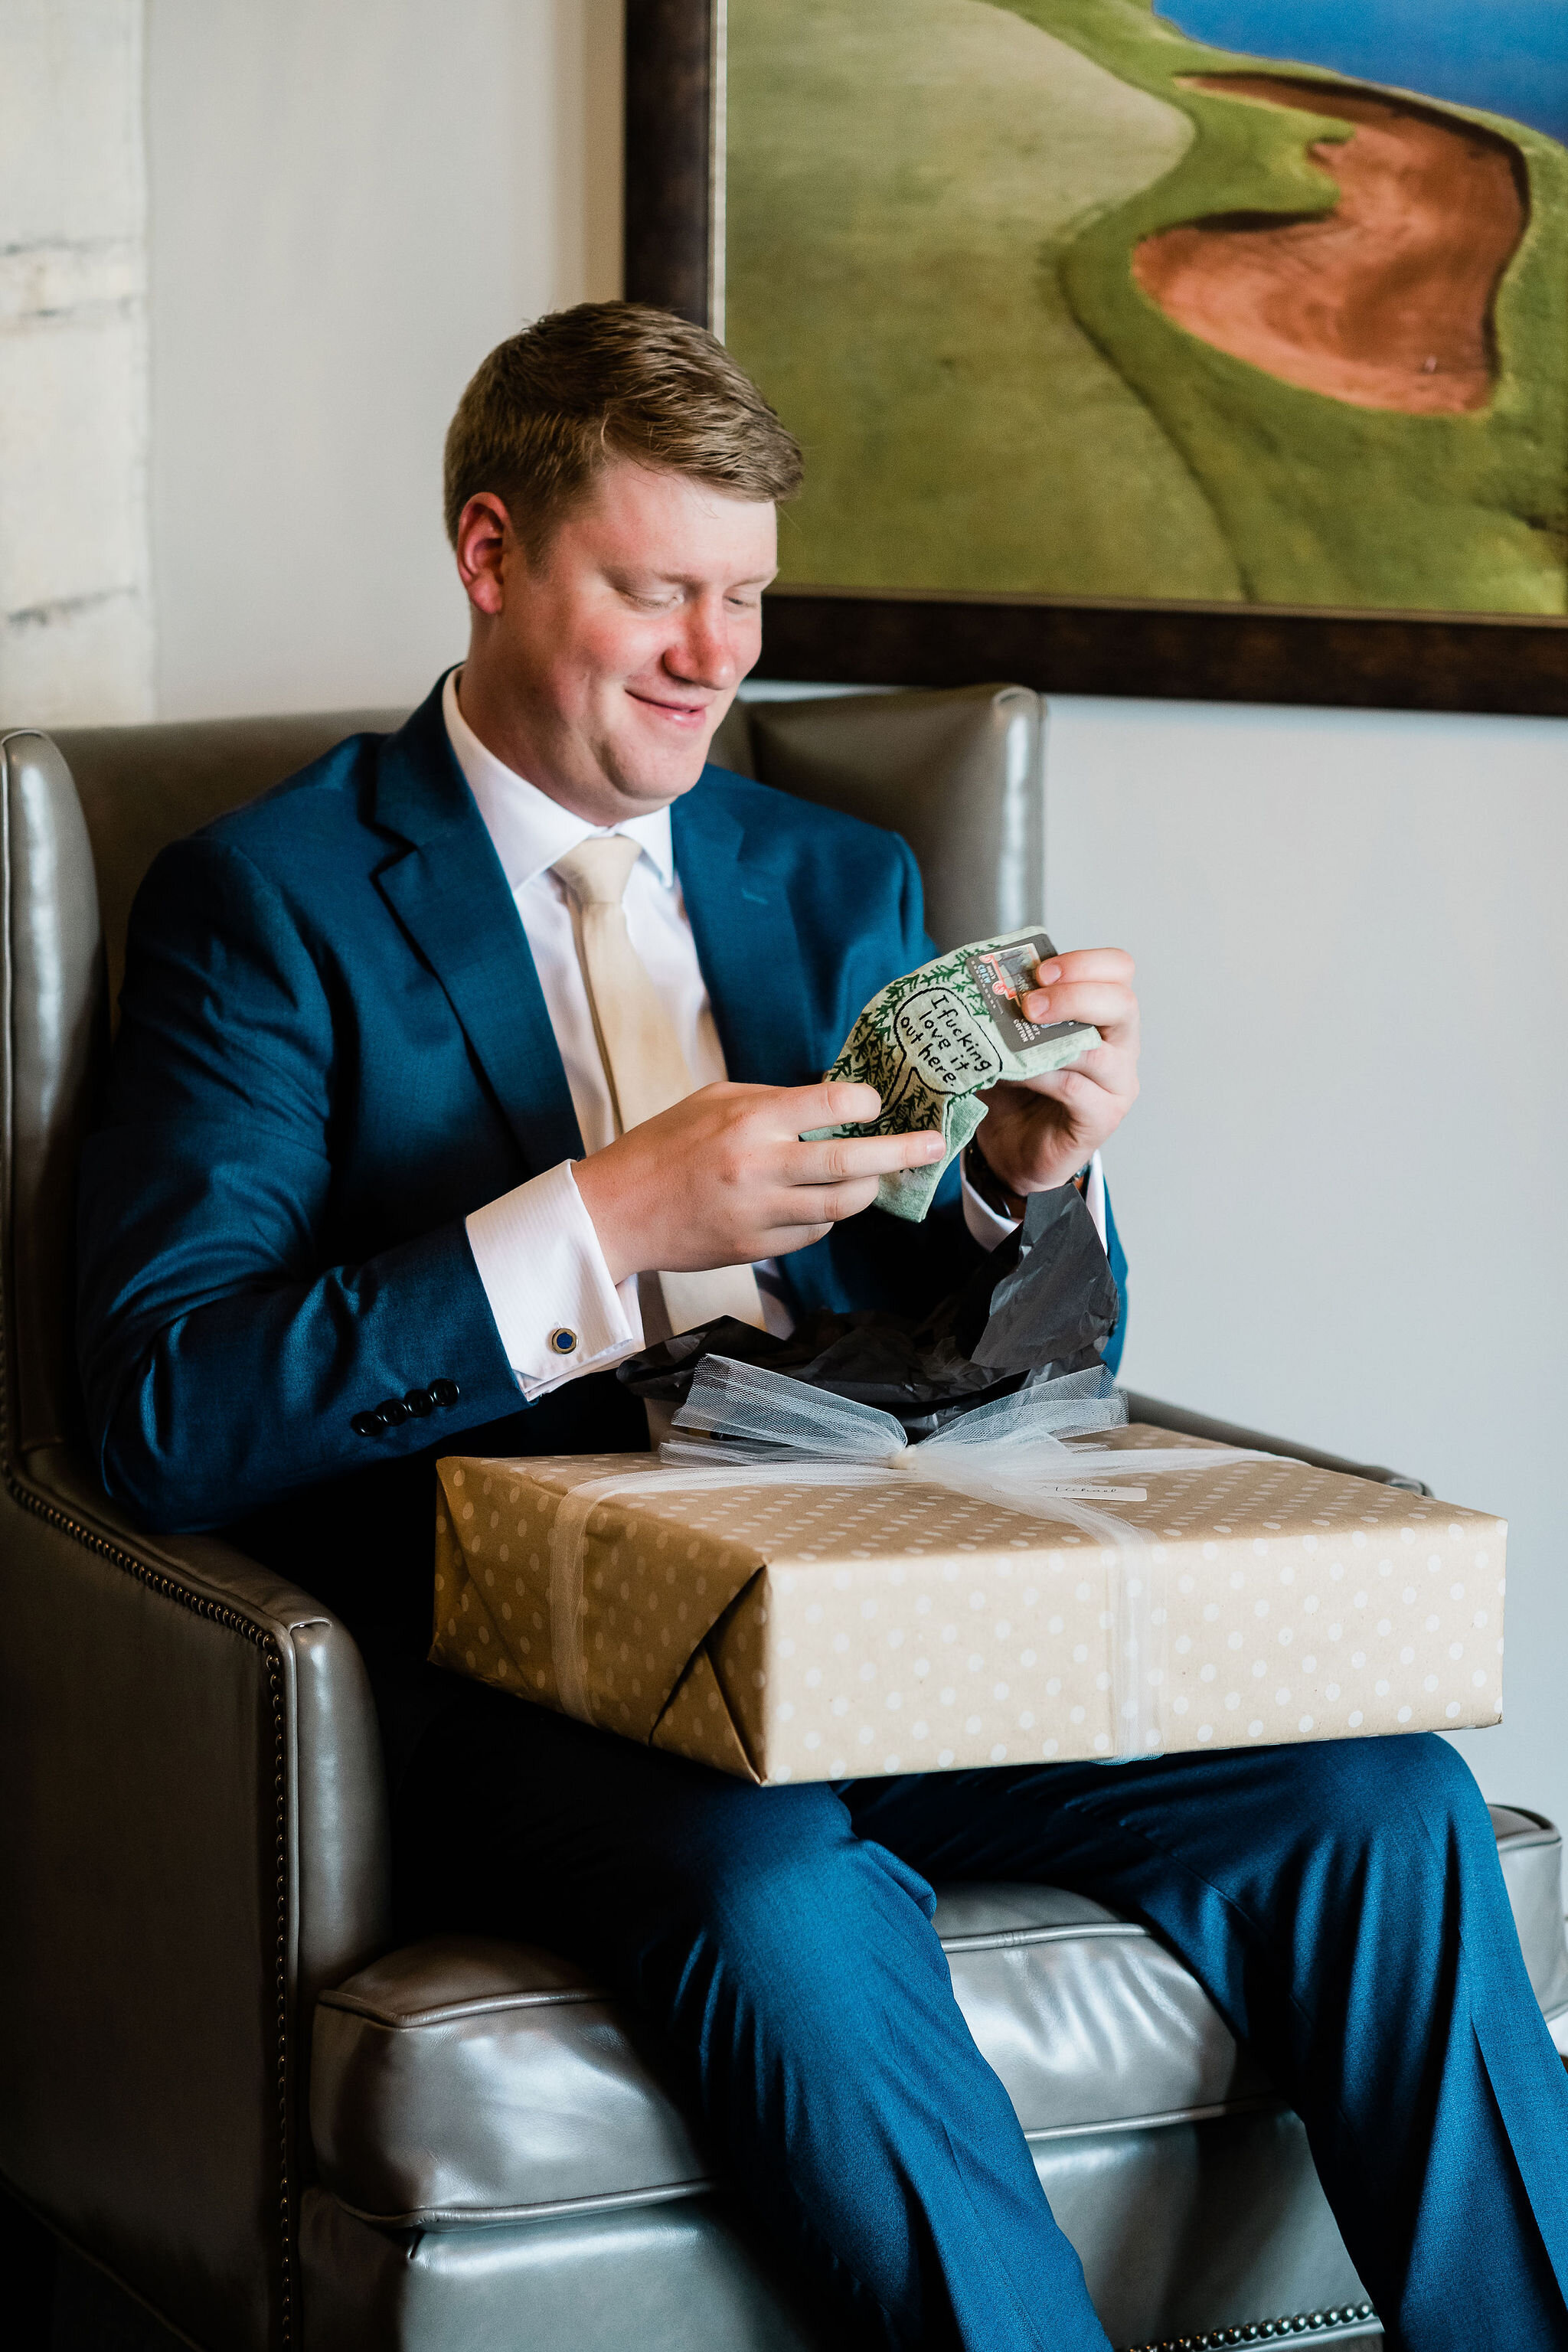 Groom opening up a gift from the bride